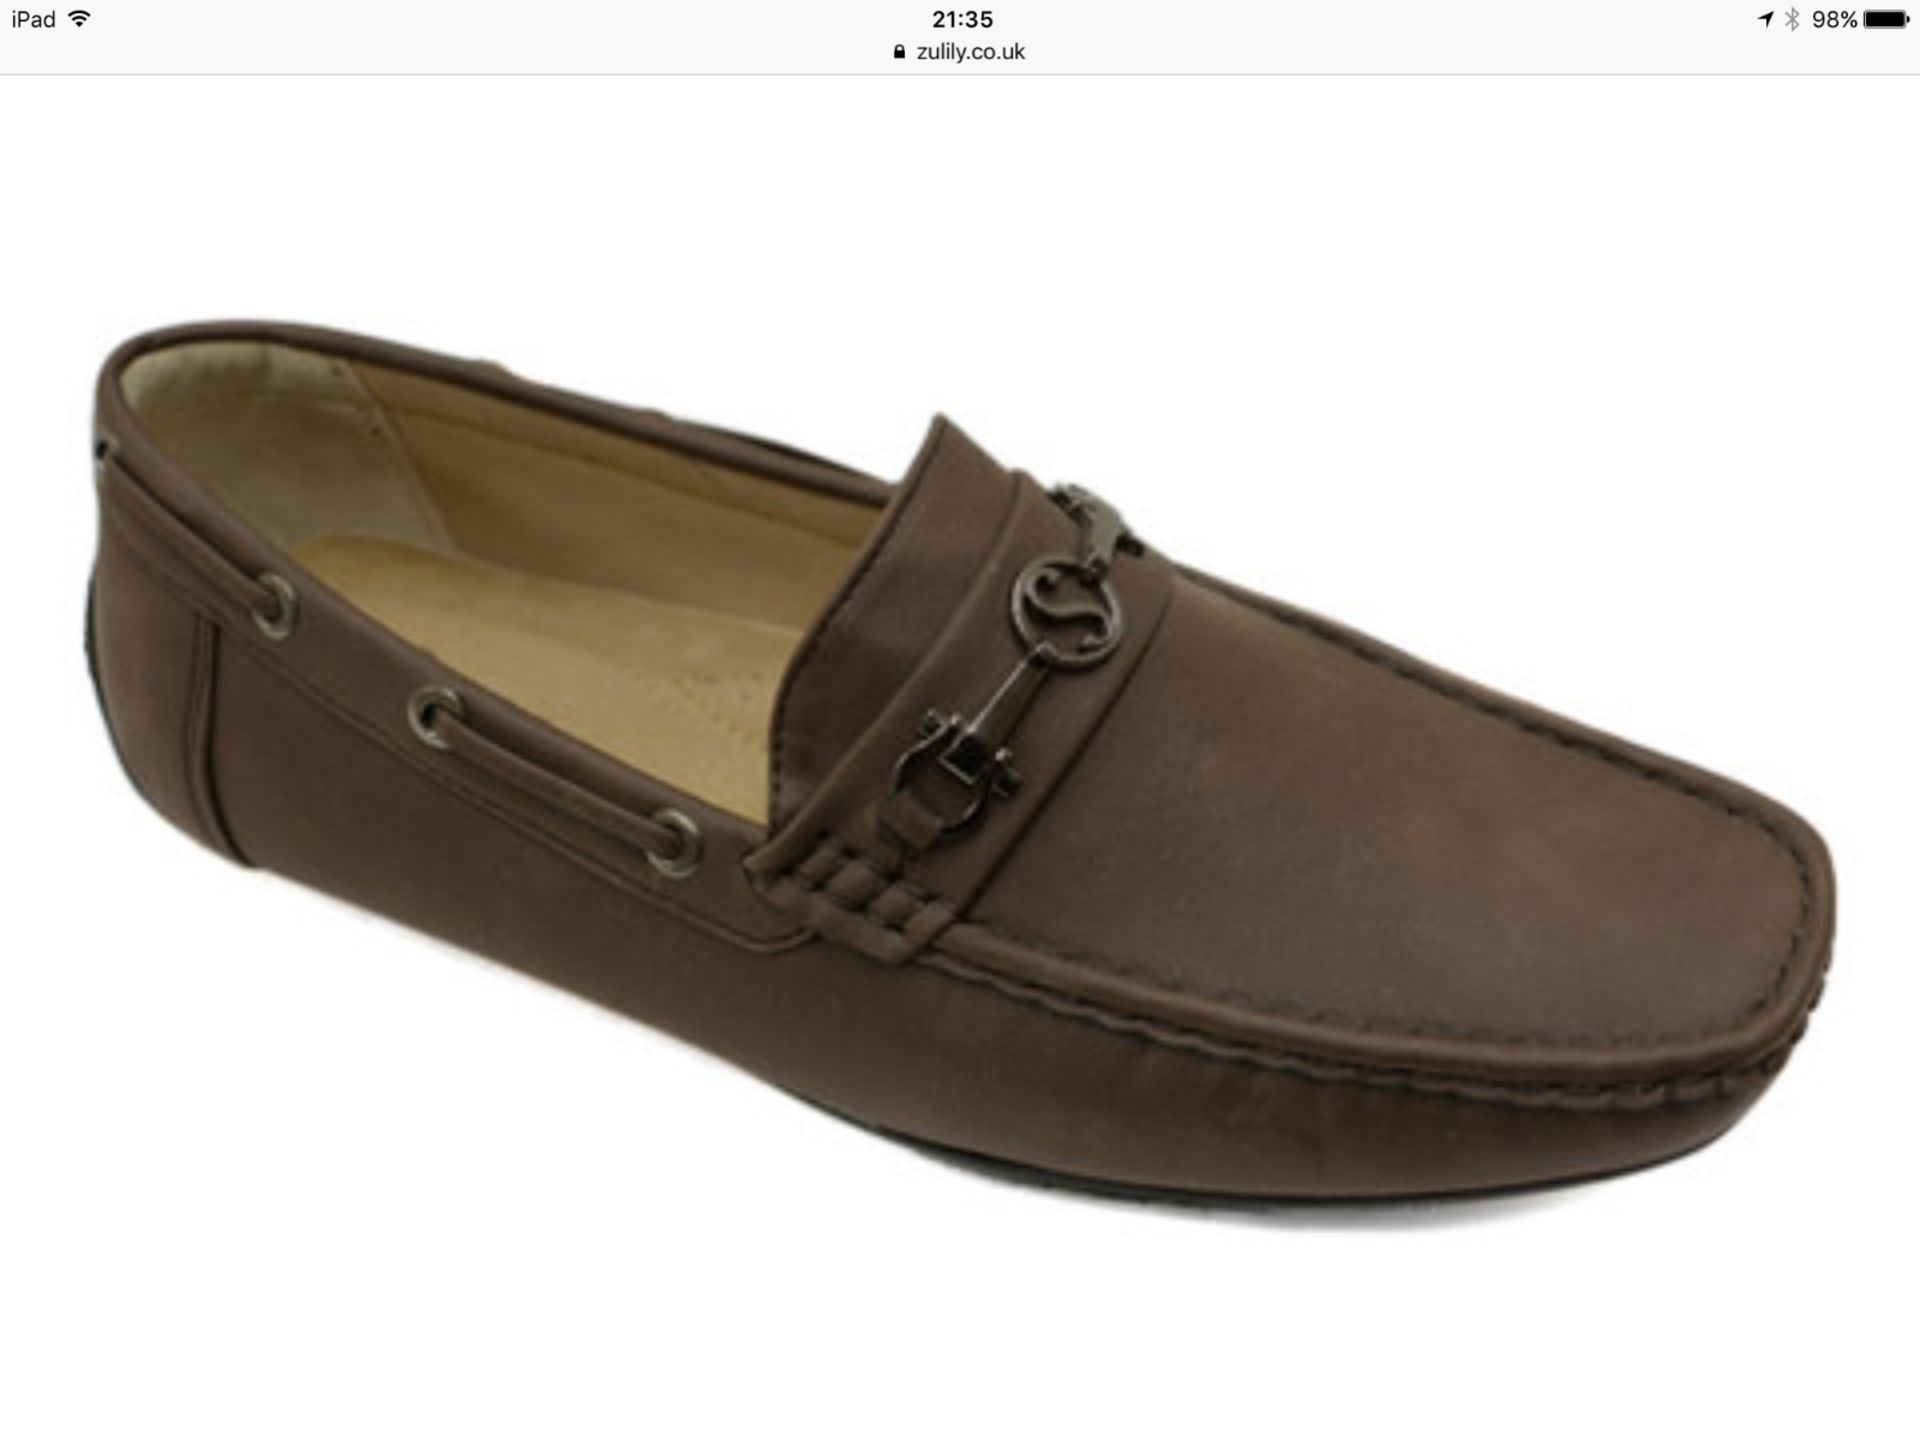 Oudihong Brown S-Buckle Men's Boat Moccasin, Size US 8/UK 7 (New with box) [Ref: 46966854]